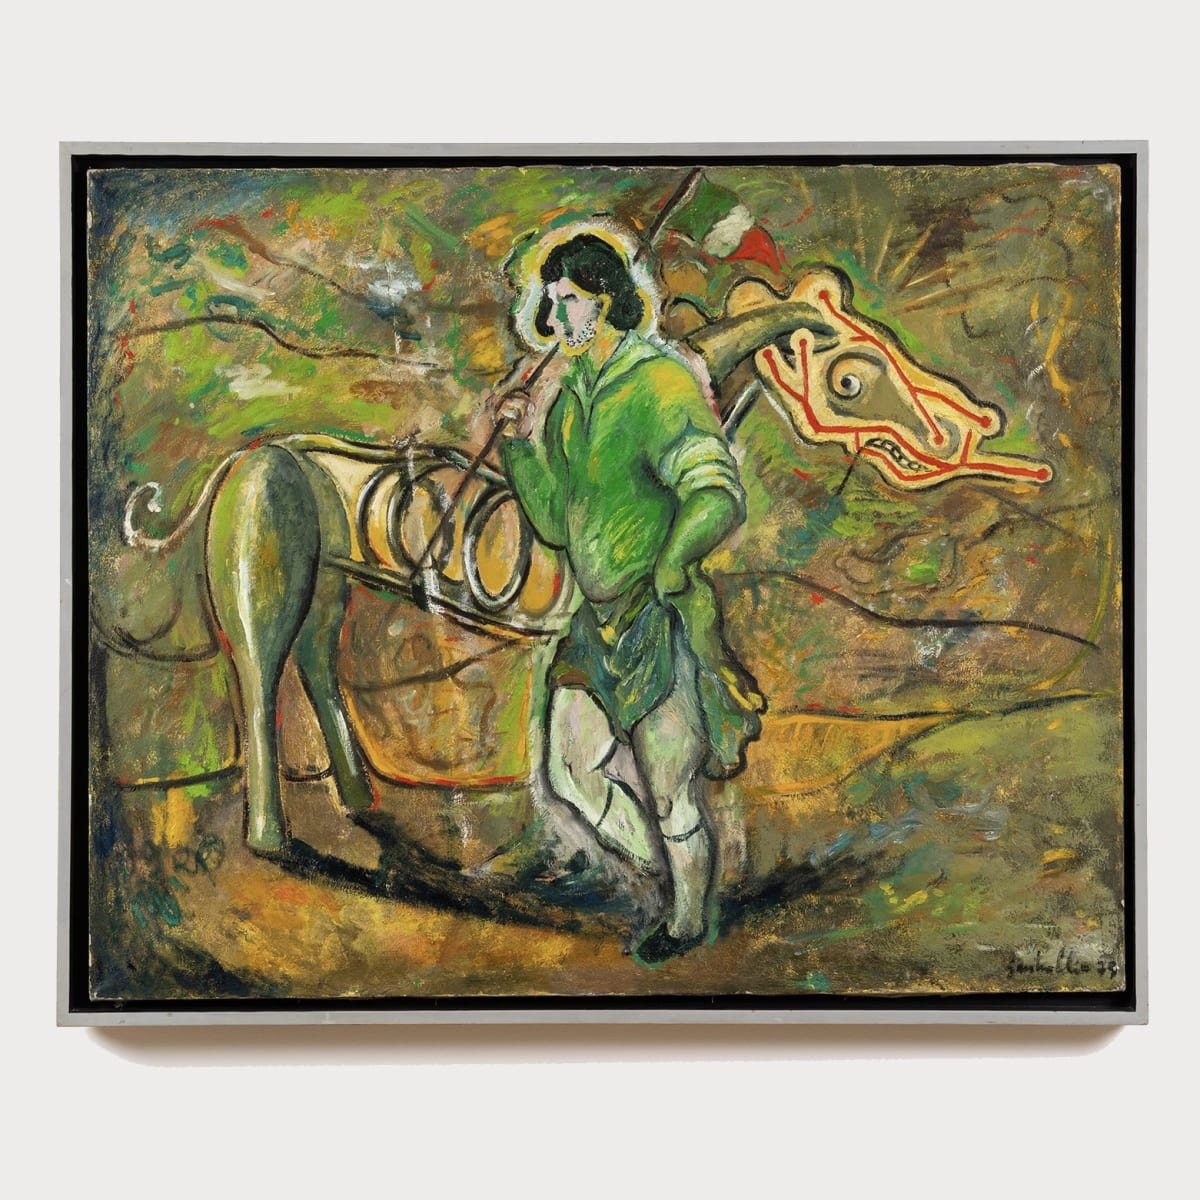 Sandro Chia, Untitled / Man with horse and banner, 1979